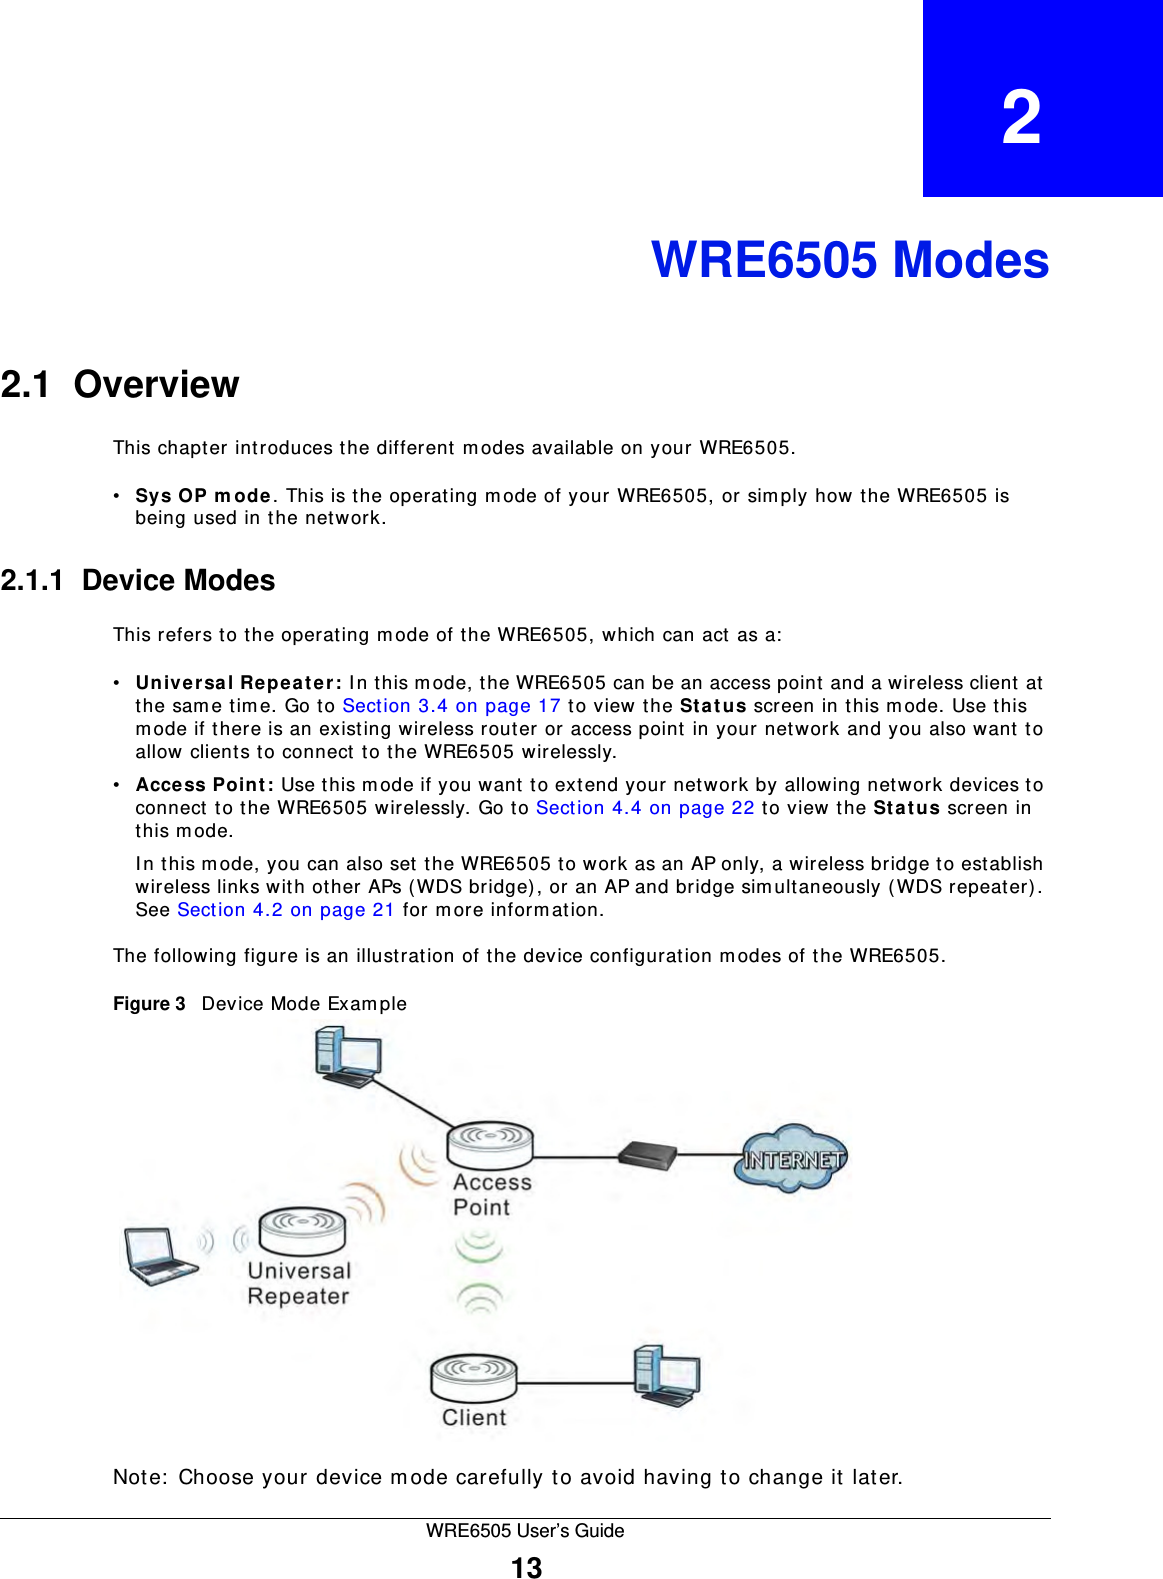 WRE6505 User’s Guide13CHAPTER   2WRE6505 Modes2.1  OverviewThis chapter introduces the different m odes available on your WRE6505. •Sys OP m ode. This is the operating m ode of your WRE6505, or simply how the WRE6505 is being used in the network. 2.1.1  Device ModesThis refers to the operating m ode of the WRE6505, which can act as a:•Unive rsa l Repe ater : I n this m ode, the WRE6505 can be an access point and a wireless client at the sam e tim e. Go to Section 3.4 on page 17 to view the St a t u s screen in this m ode. Use this mode if there is an existing wireless router or access point in your network and you also want to allow clients to connect to the WRE6505 wirelessly. •Acce ss Point: Use this m ode if you want to extend your network by allowing network devices to connect to the WRE6505 wirelessly. Go to Section 4.4 on page 22 to view the St a t u s screen in this m ode. In this m ode, you can also set the WRE6505 to work as an AP only, a wireless bridge to establish wireless links with other APs (WDS bridge), or an AP and bridge simultaneously (WDS repeater). See Section 4.2 on page 21 for m ore information.The following figure is an illustration of the device configuration m odes of the WRE6505.Figure 3   Device Mode Exam ple Note:  Choose your device m ode carefully to avoid having to change it later.